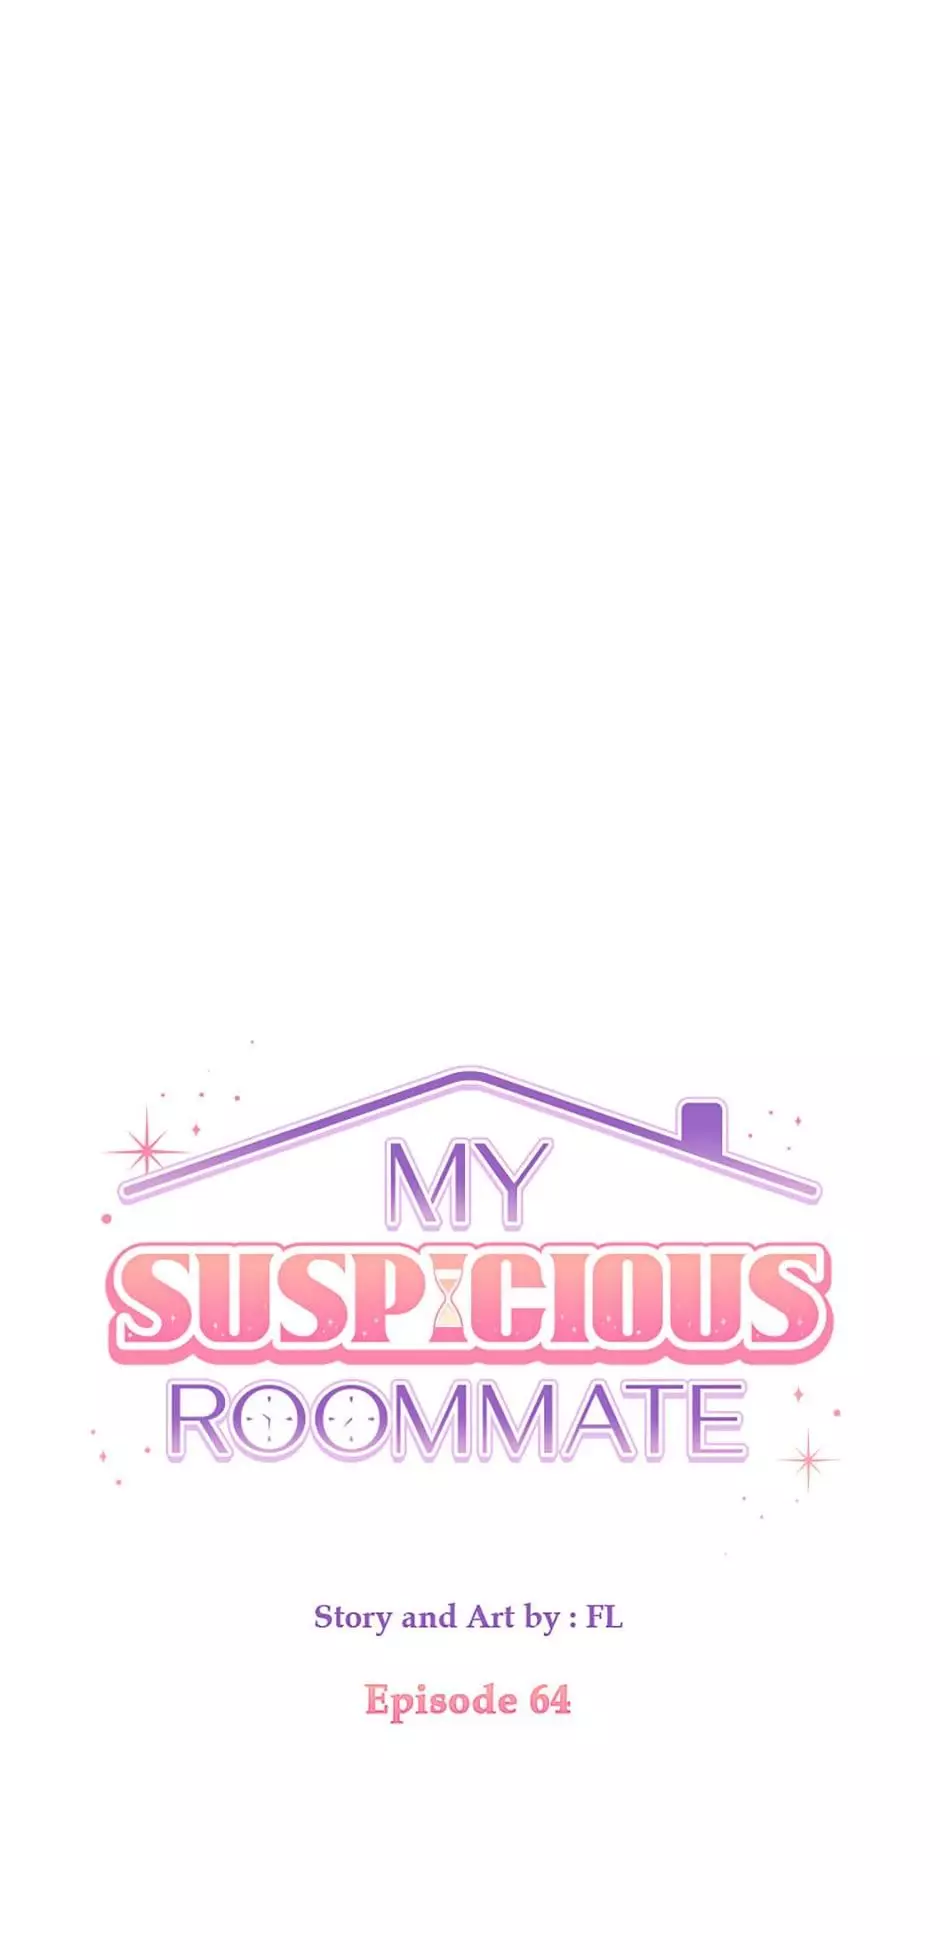 My Suspicious Roommate - 64 page 21-22144f0c